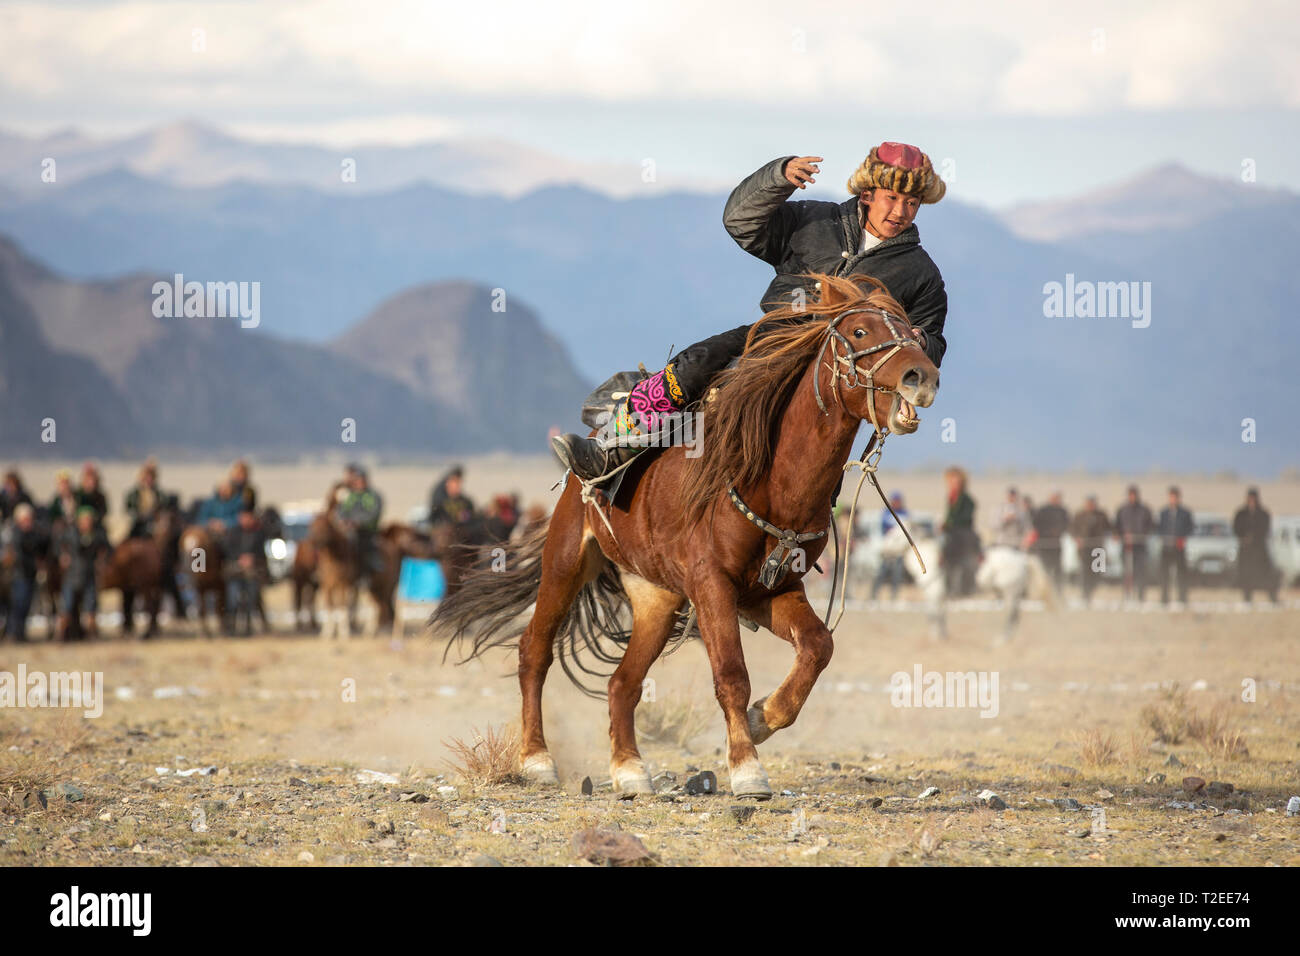 bayan Ulgii, Mongolia, 3rd October 2015: kazakh men on their horses in a landscape of western mongolia Stock Photo